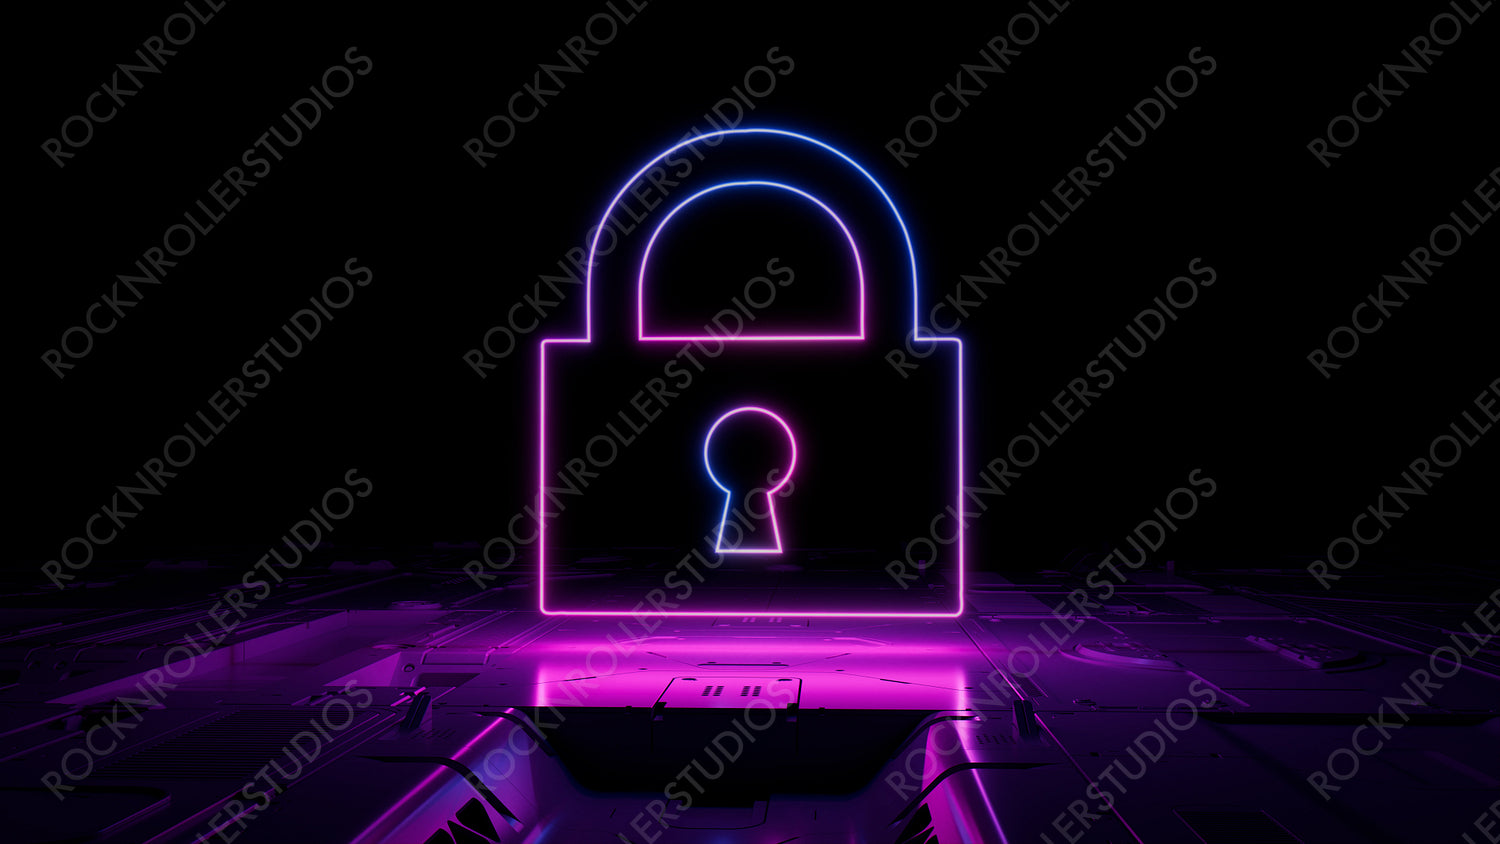 Pink and Blue Security Technology Concept with lock symbol as a neon light. Vibrant colored icon, on a black background with high tech floor. 3D Render